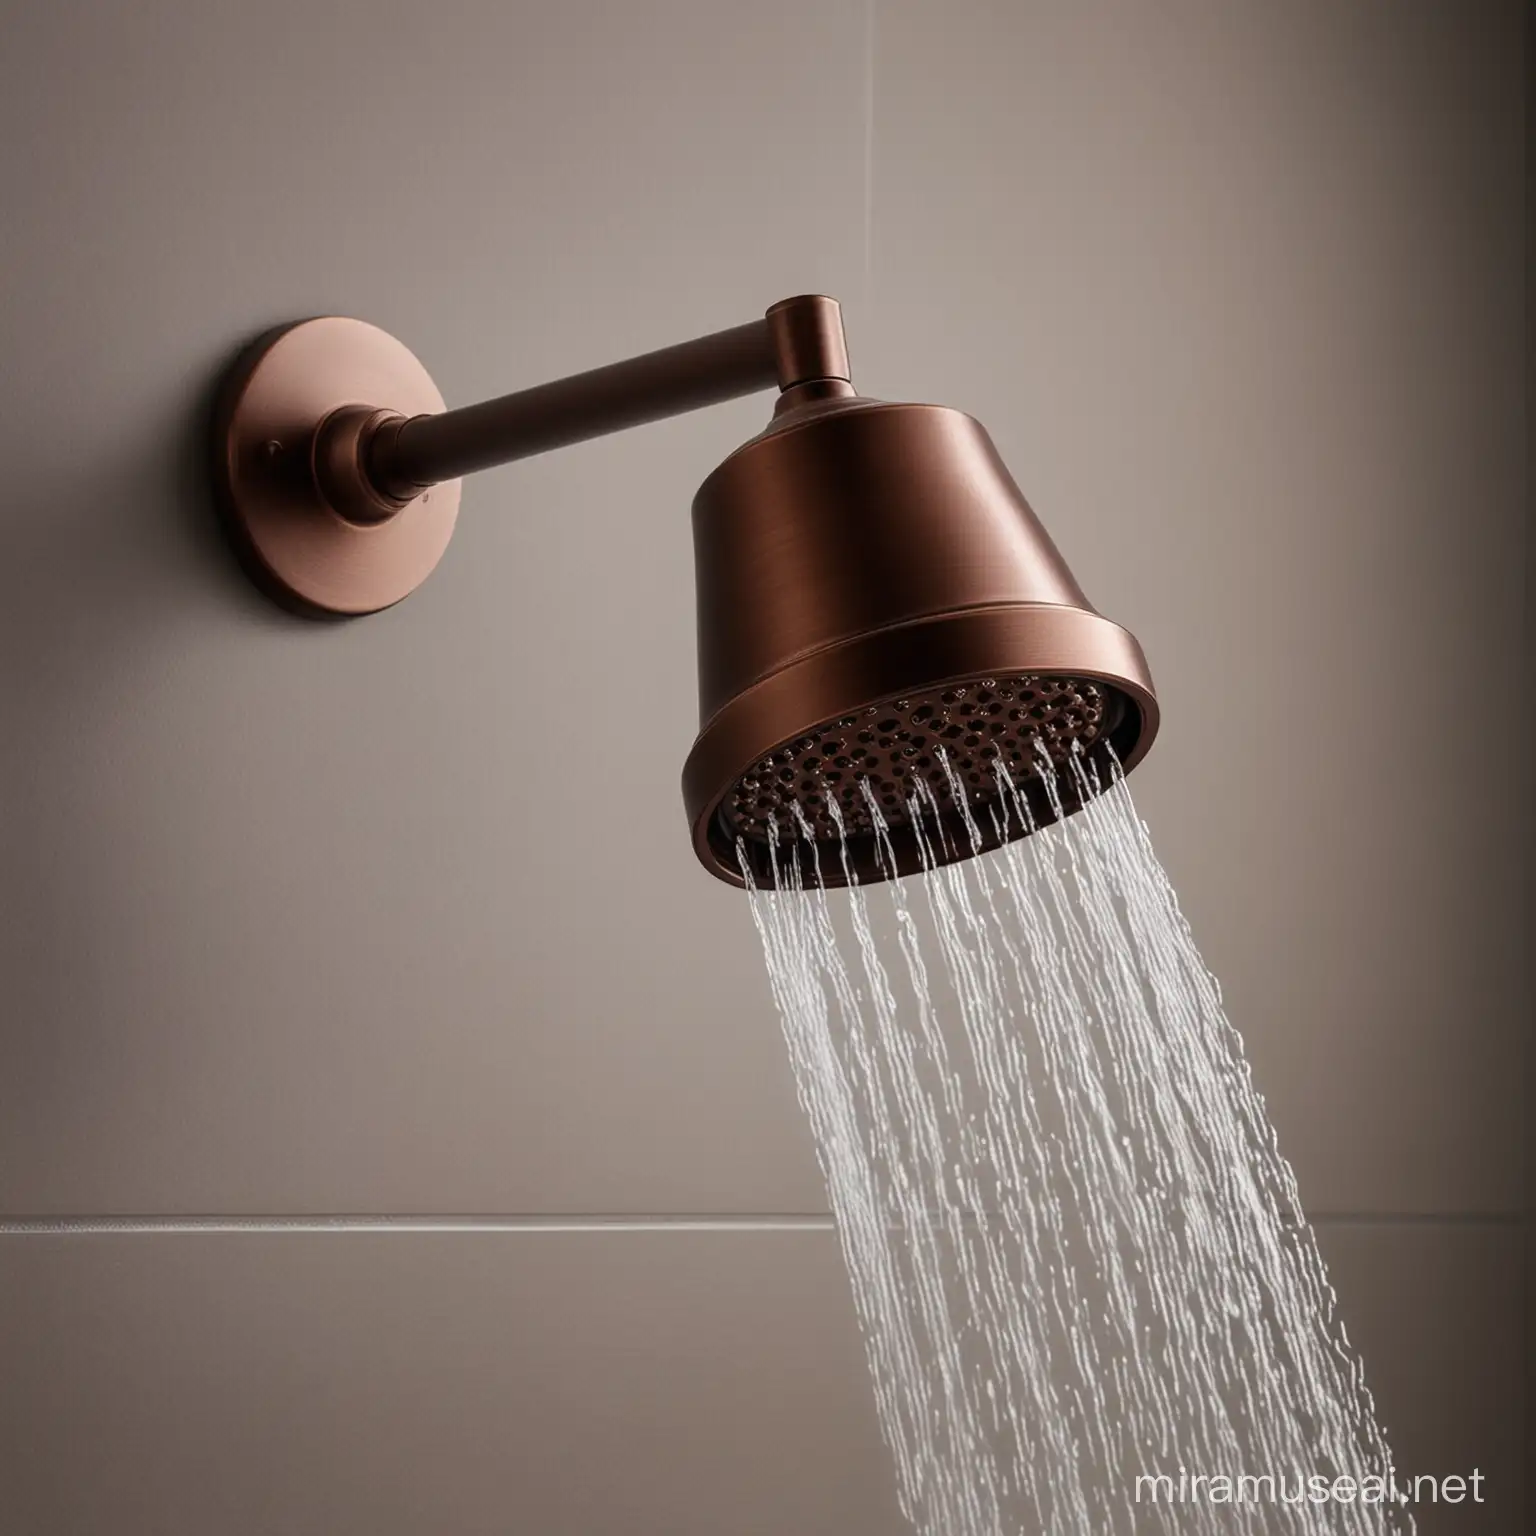 Shower head coated with dark copper coating